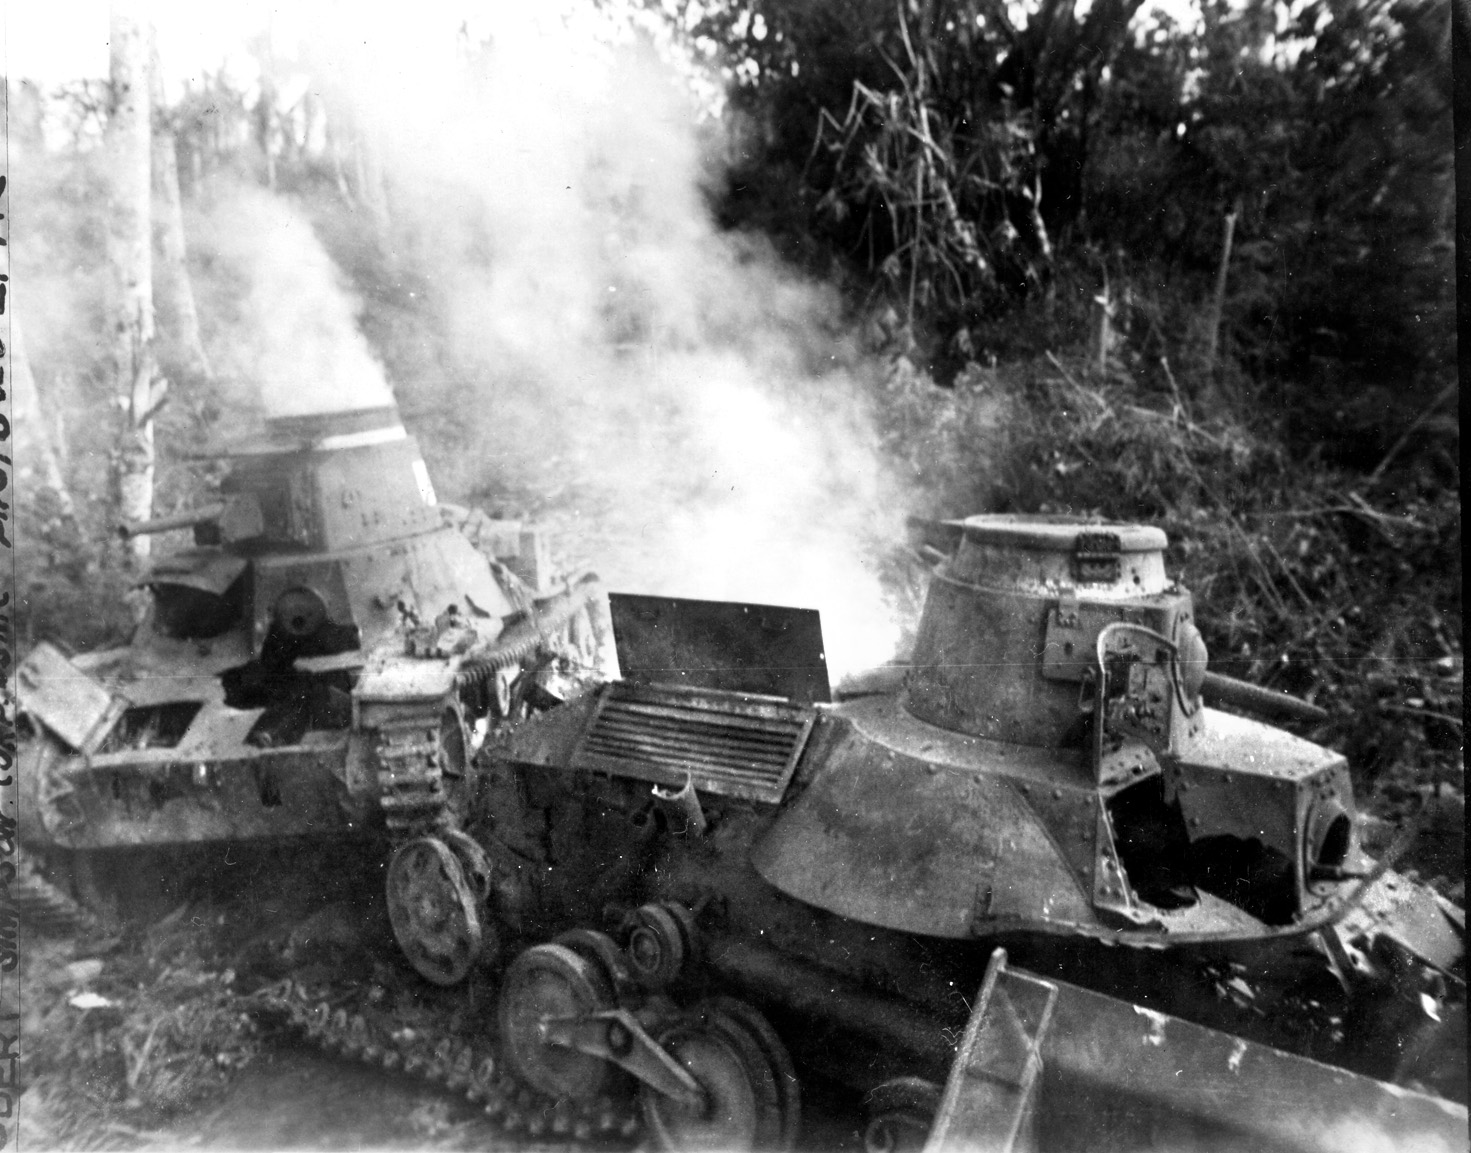 Smoldering hulks of two Japanese Type 95 ‘Ha-Go’ tanks lie abandoned after the fight. The Japanese used their light tanks successfully against the Americans. 